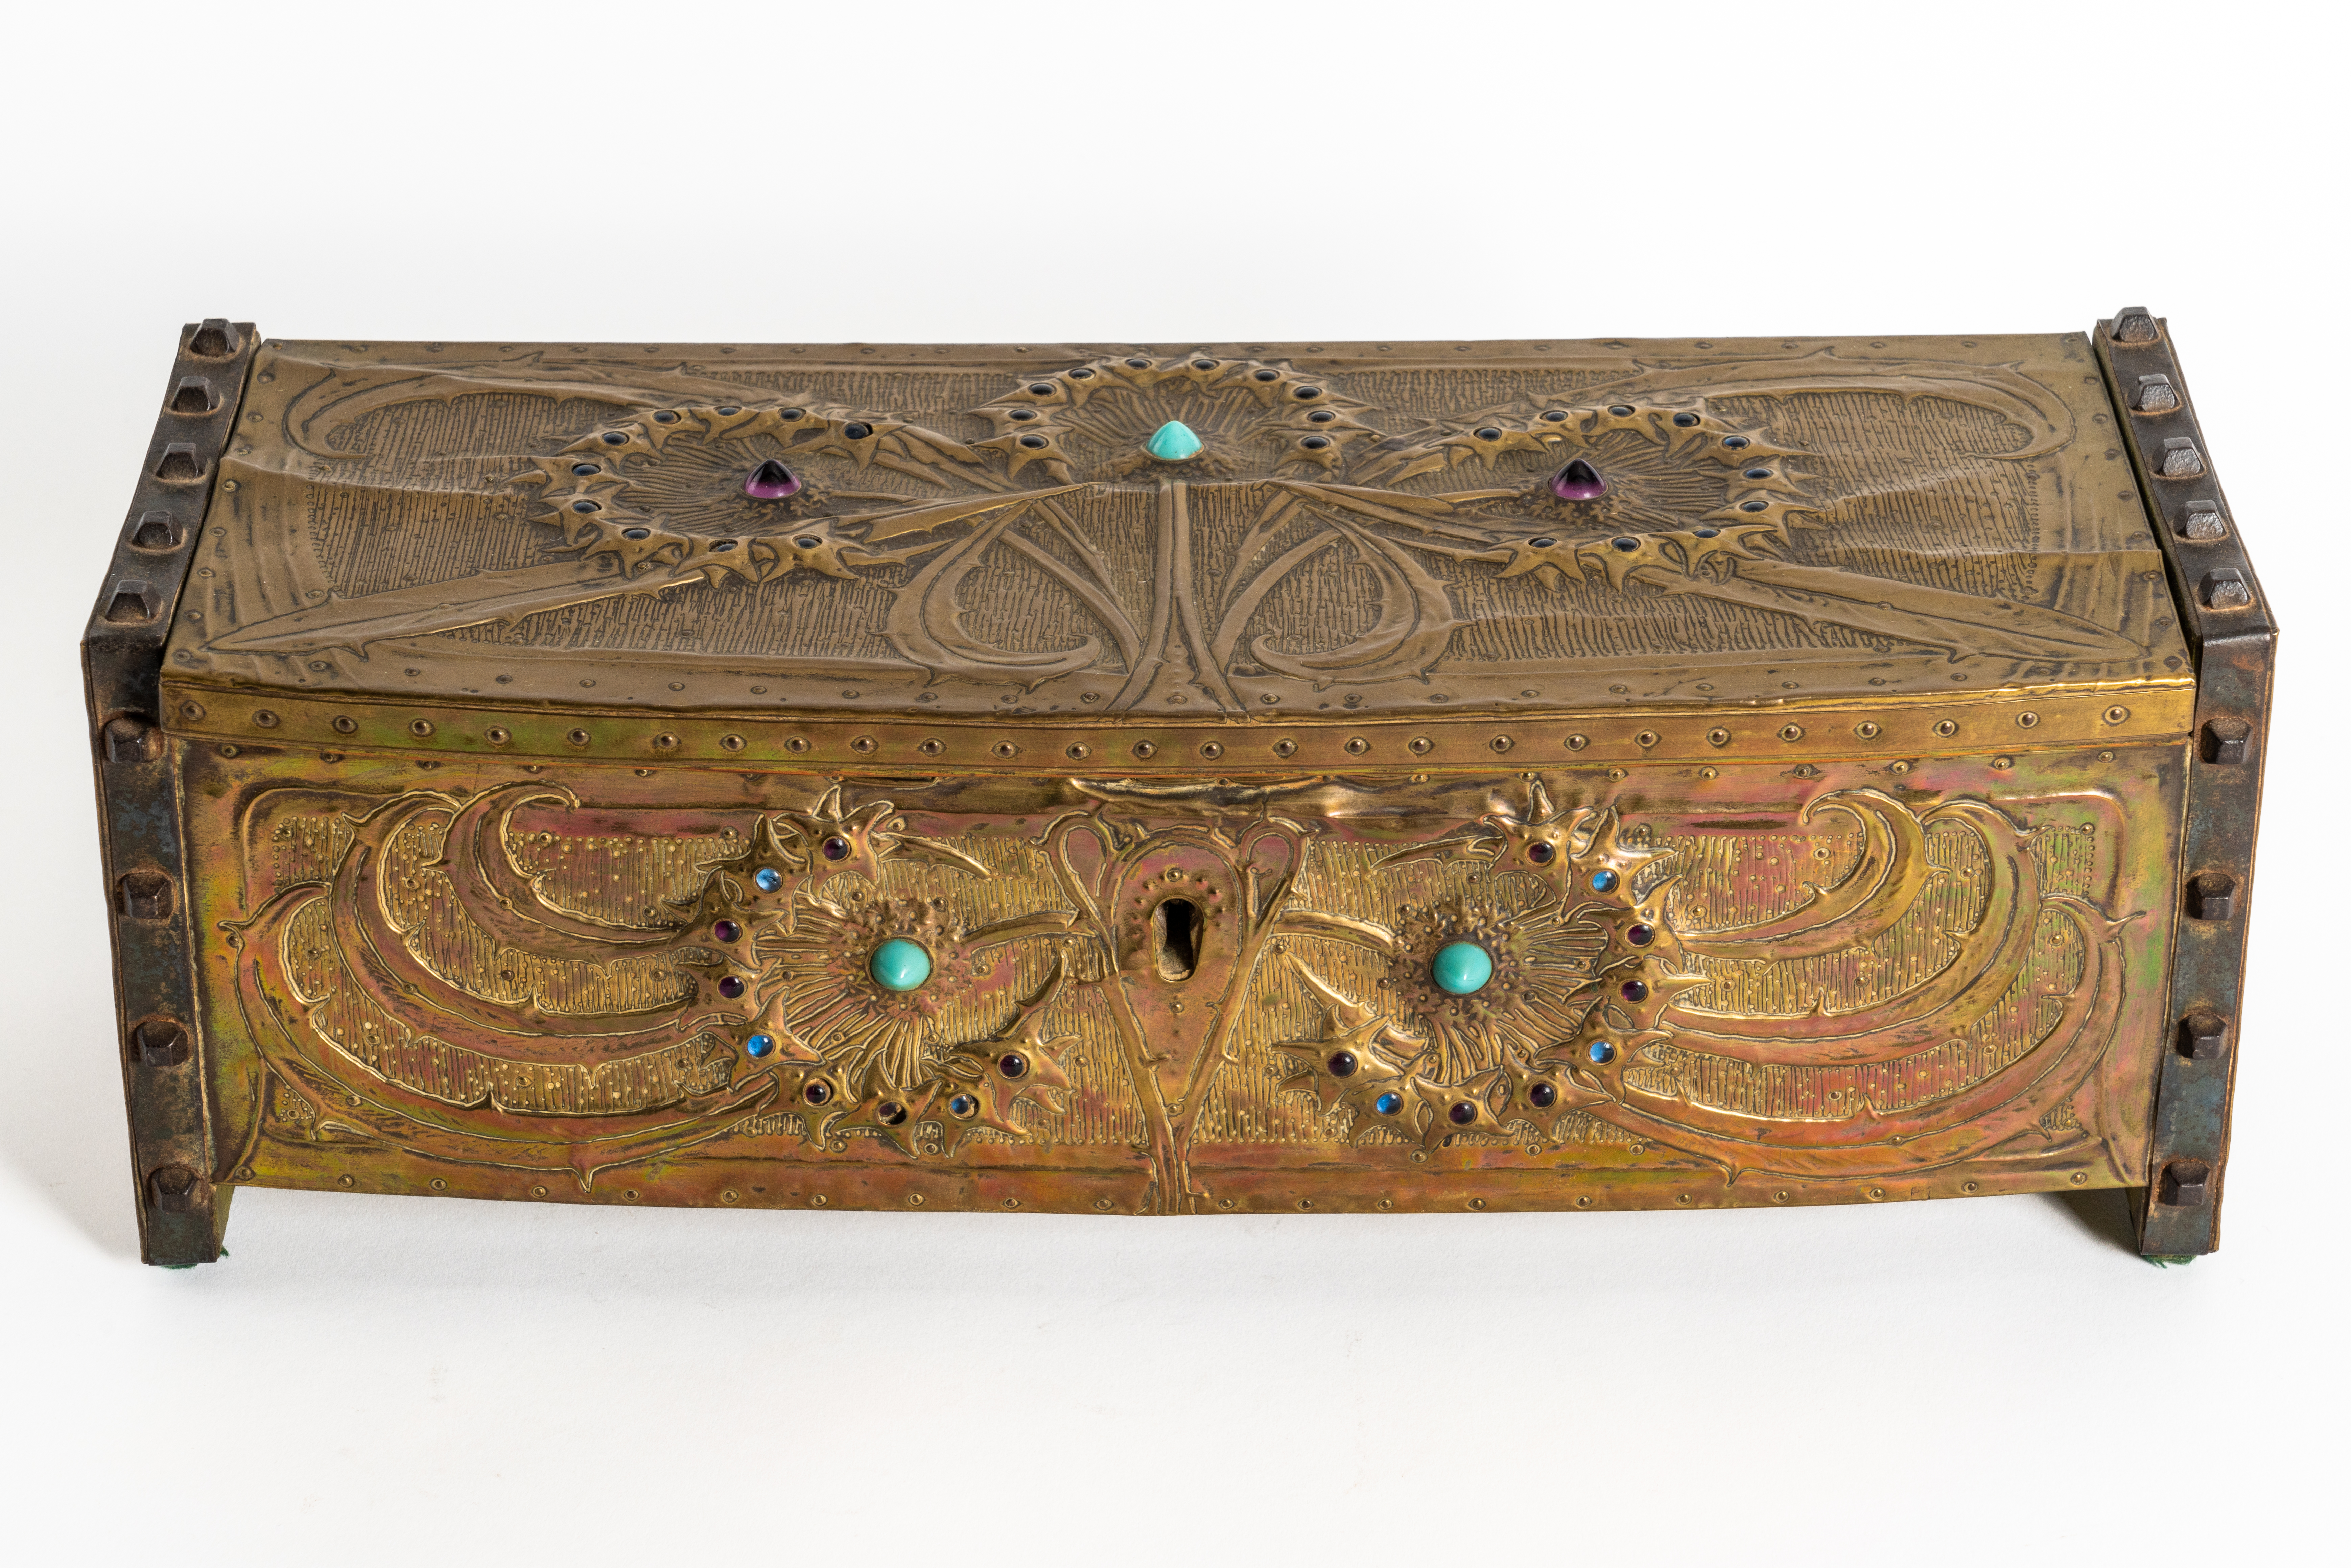 ALFRED DAGUET (1875-1942): A FRENCH ART NOUVEAU EMBOSSED GILT COPPER AND GLASS MOUNTED CASKET... - Image 4 of 8